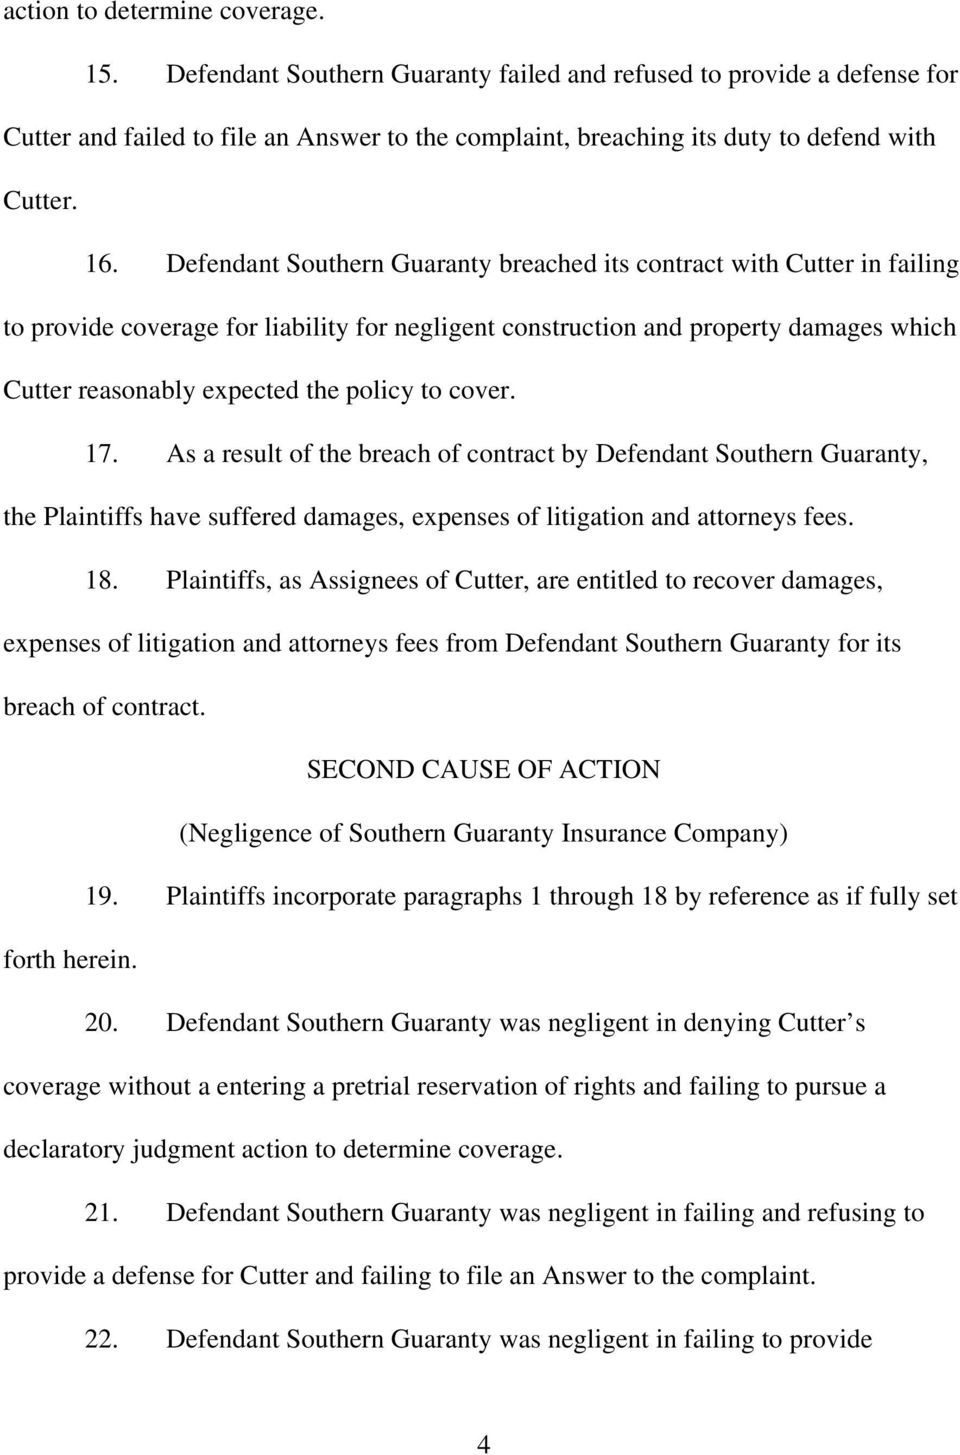 Defendant Southern Guaranty breached its contract with Cutter in failing to provide coverage for liability for negligent construction and property damages which Cutter reasonably expected the policy